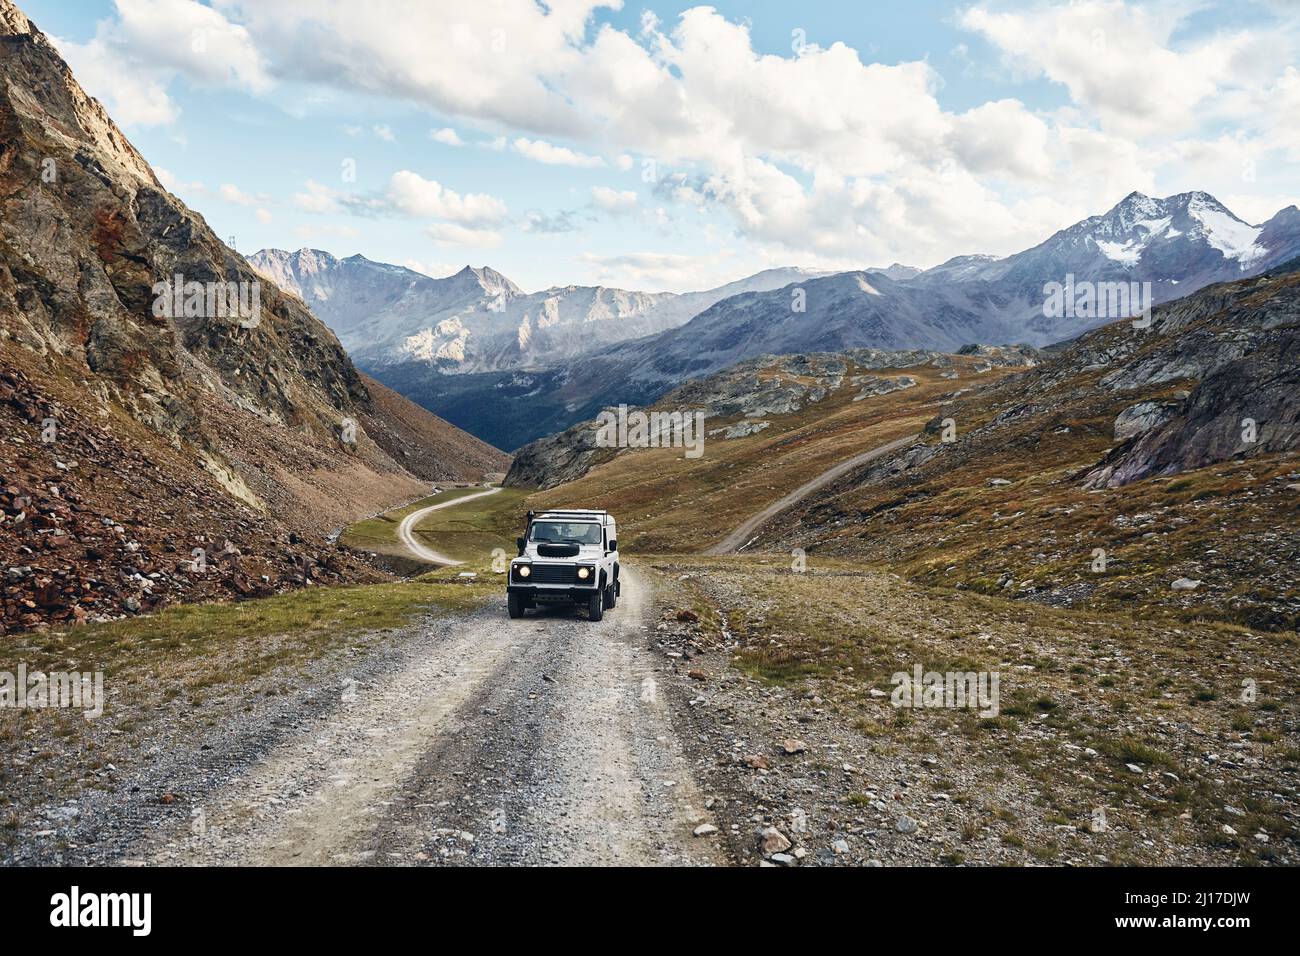 Off-road vehicle on gravel road by mountains, Schnalstal, South Tyrol, Italy Stock Photo